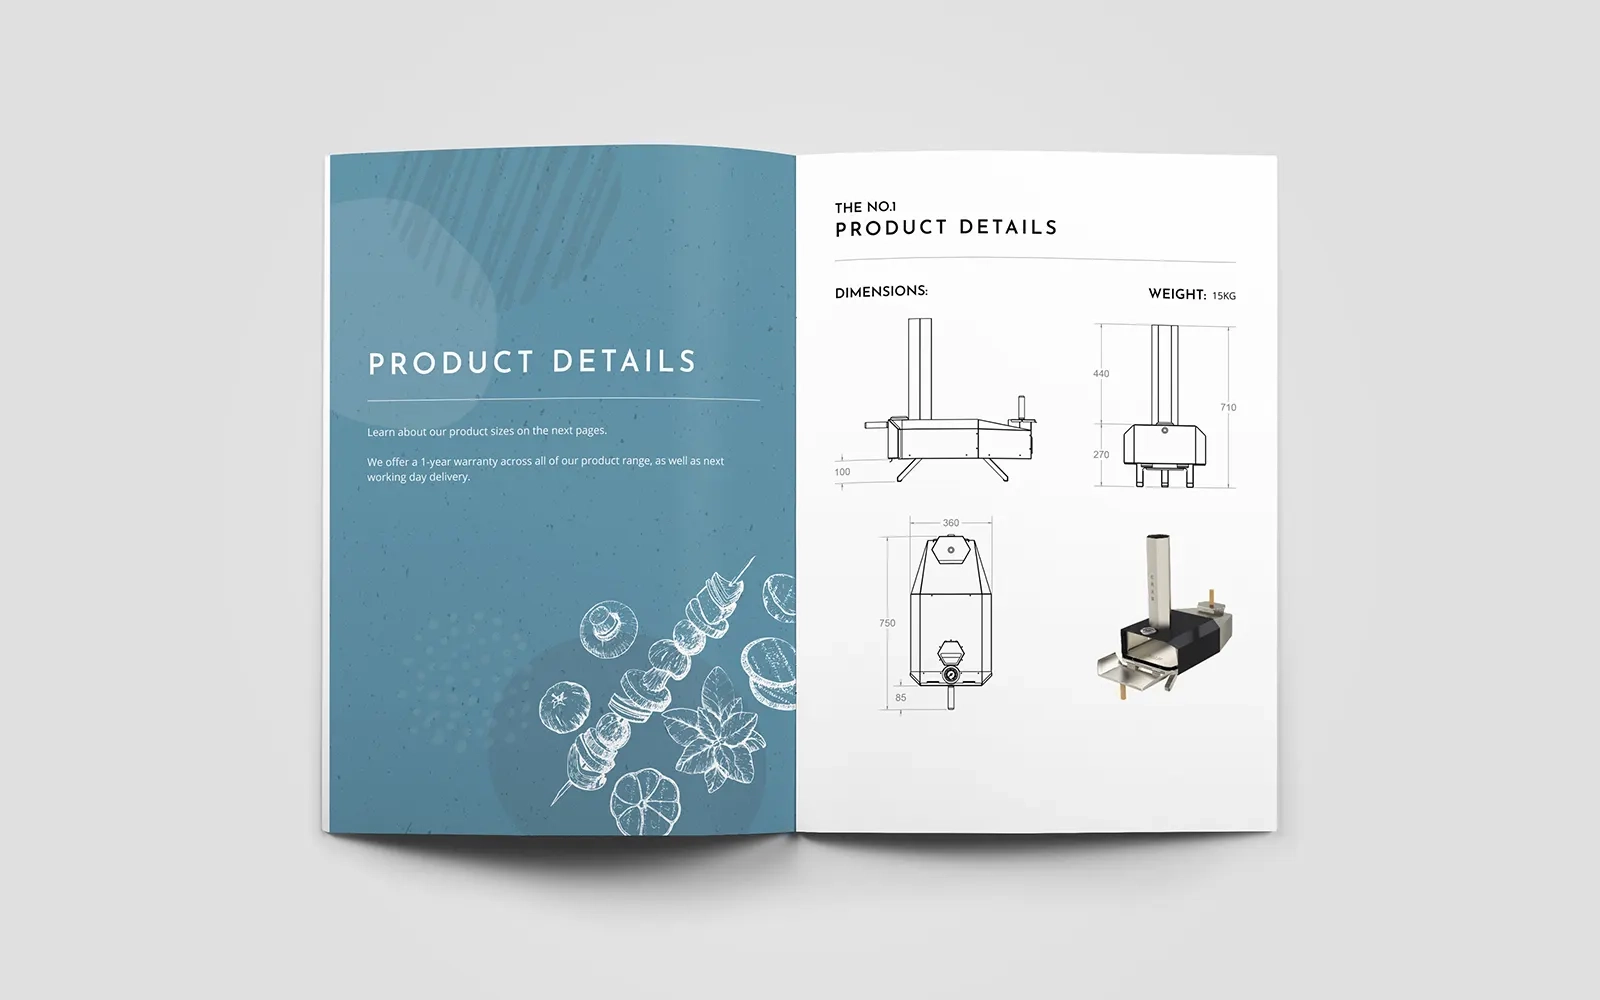 A two page spread of the brochure showing the 'product details' divider page and product specifications 